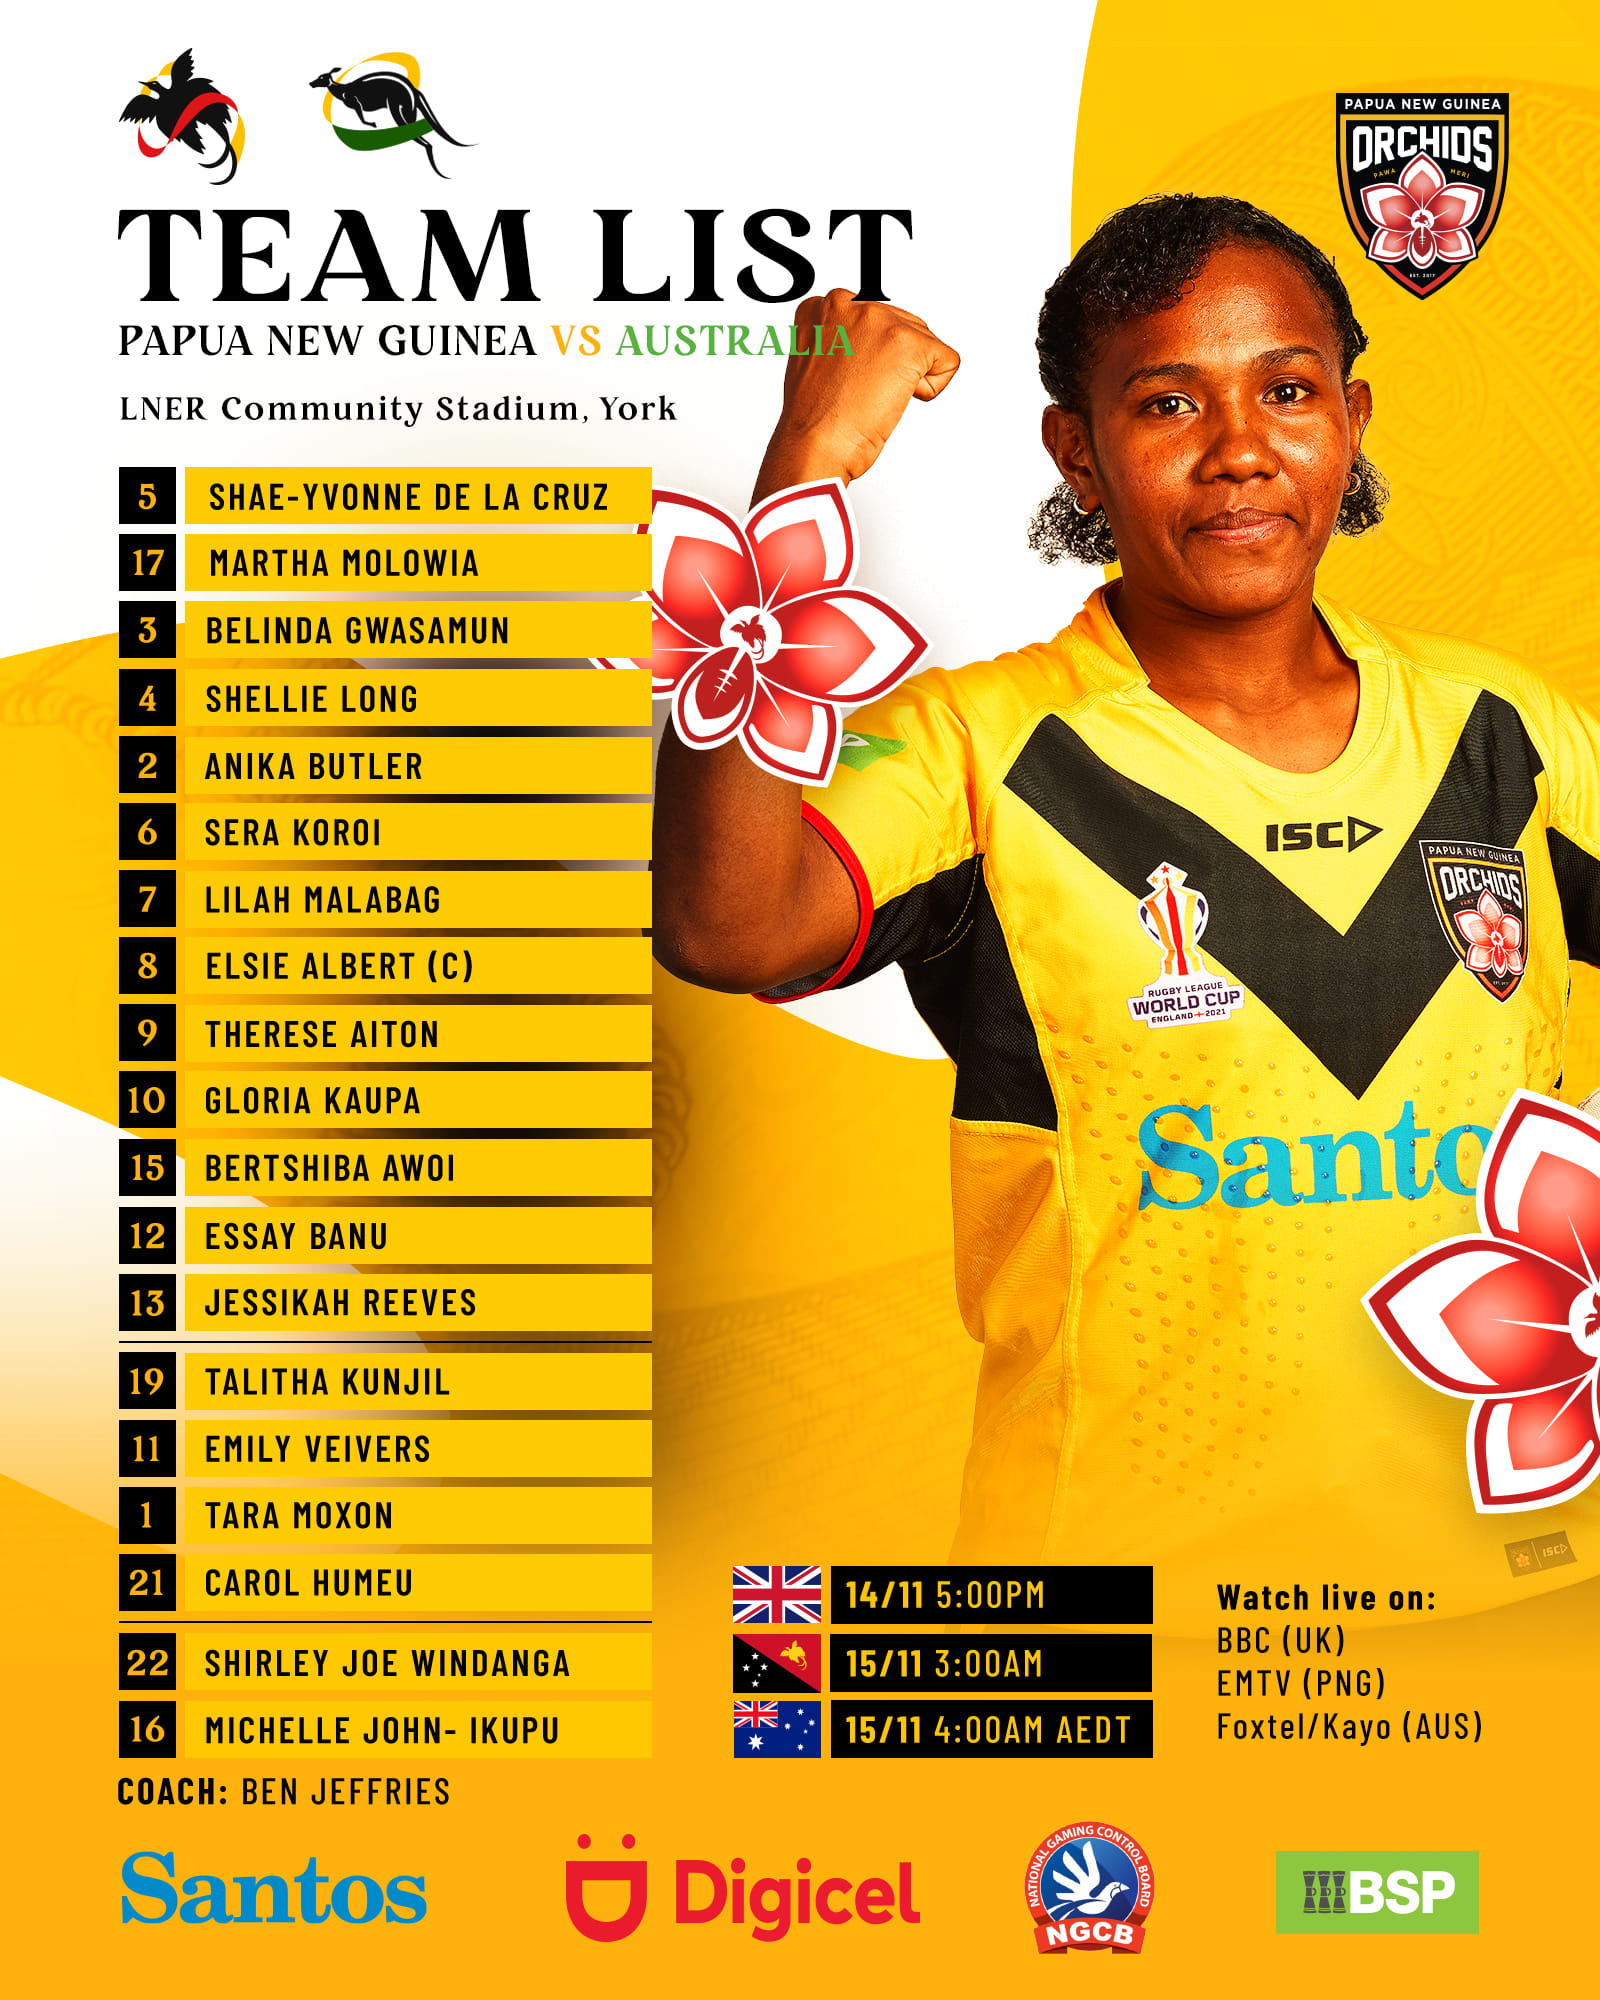 PNG Orchids Team to Face Australia in Womens Rugby League World Cup